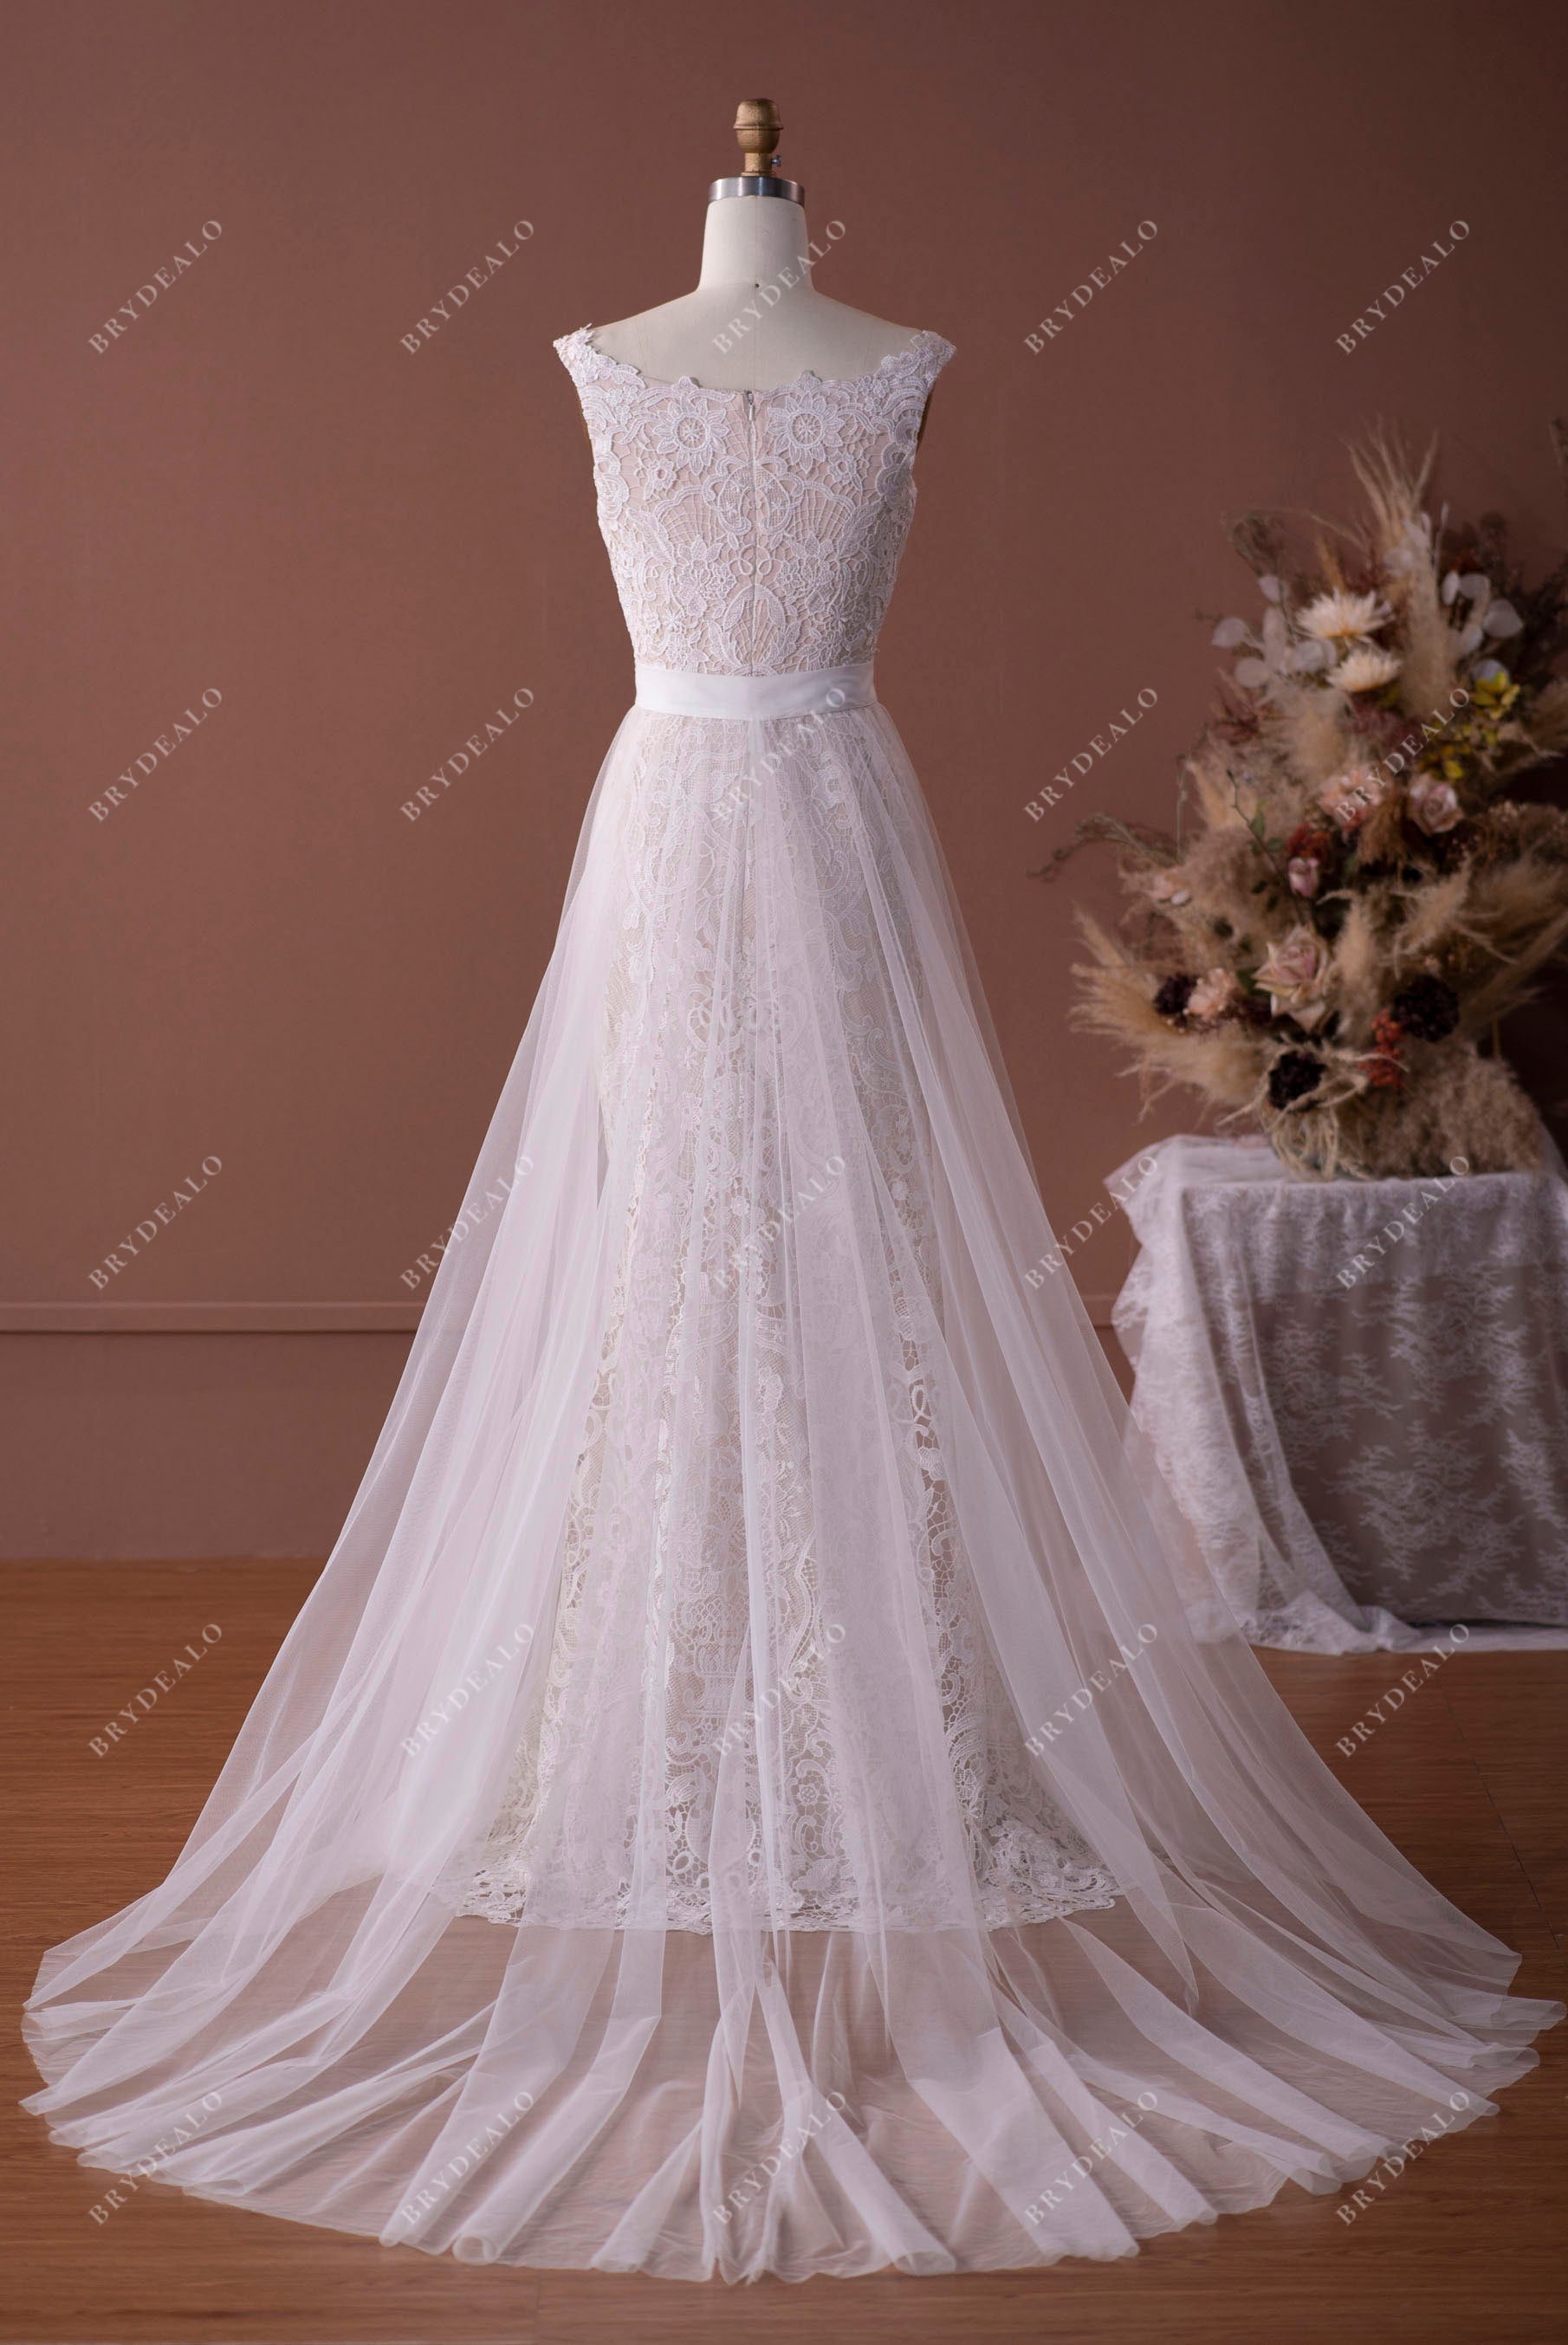 Lace Mermaid Wedding Dress with Detachable Tulle Overskirt